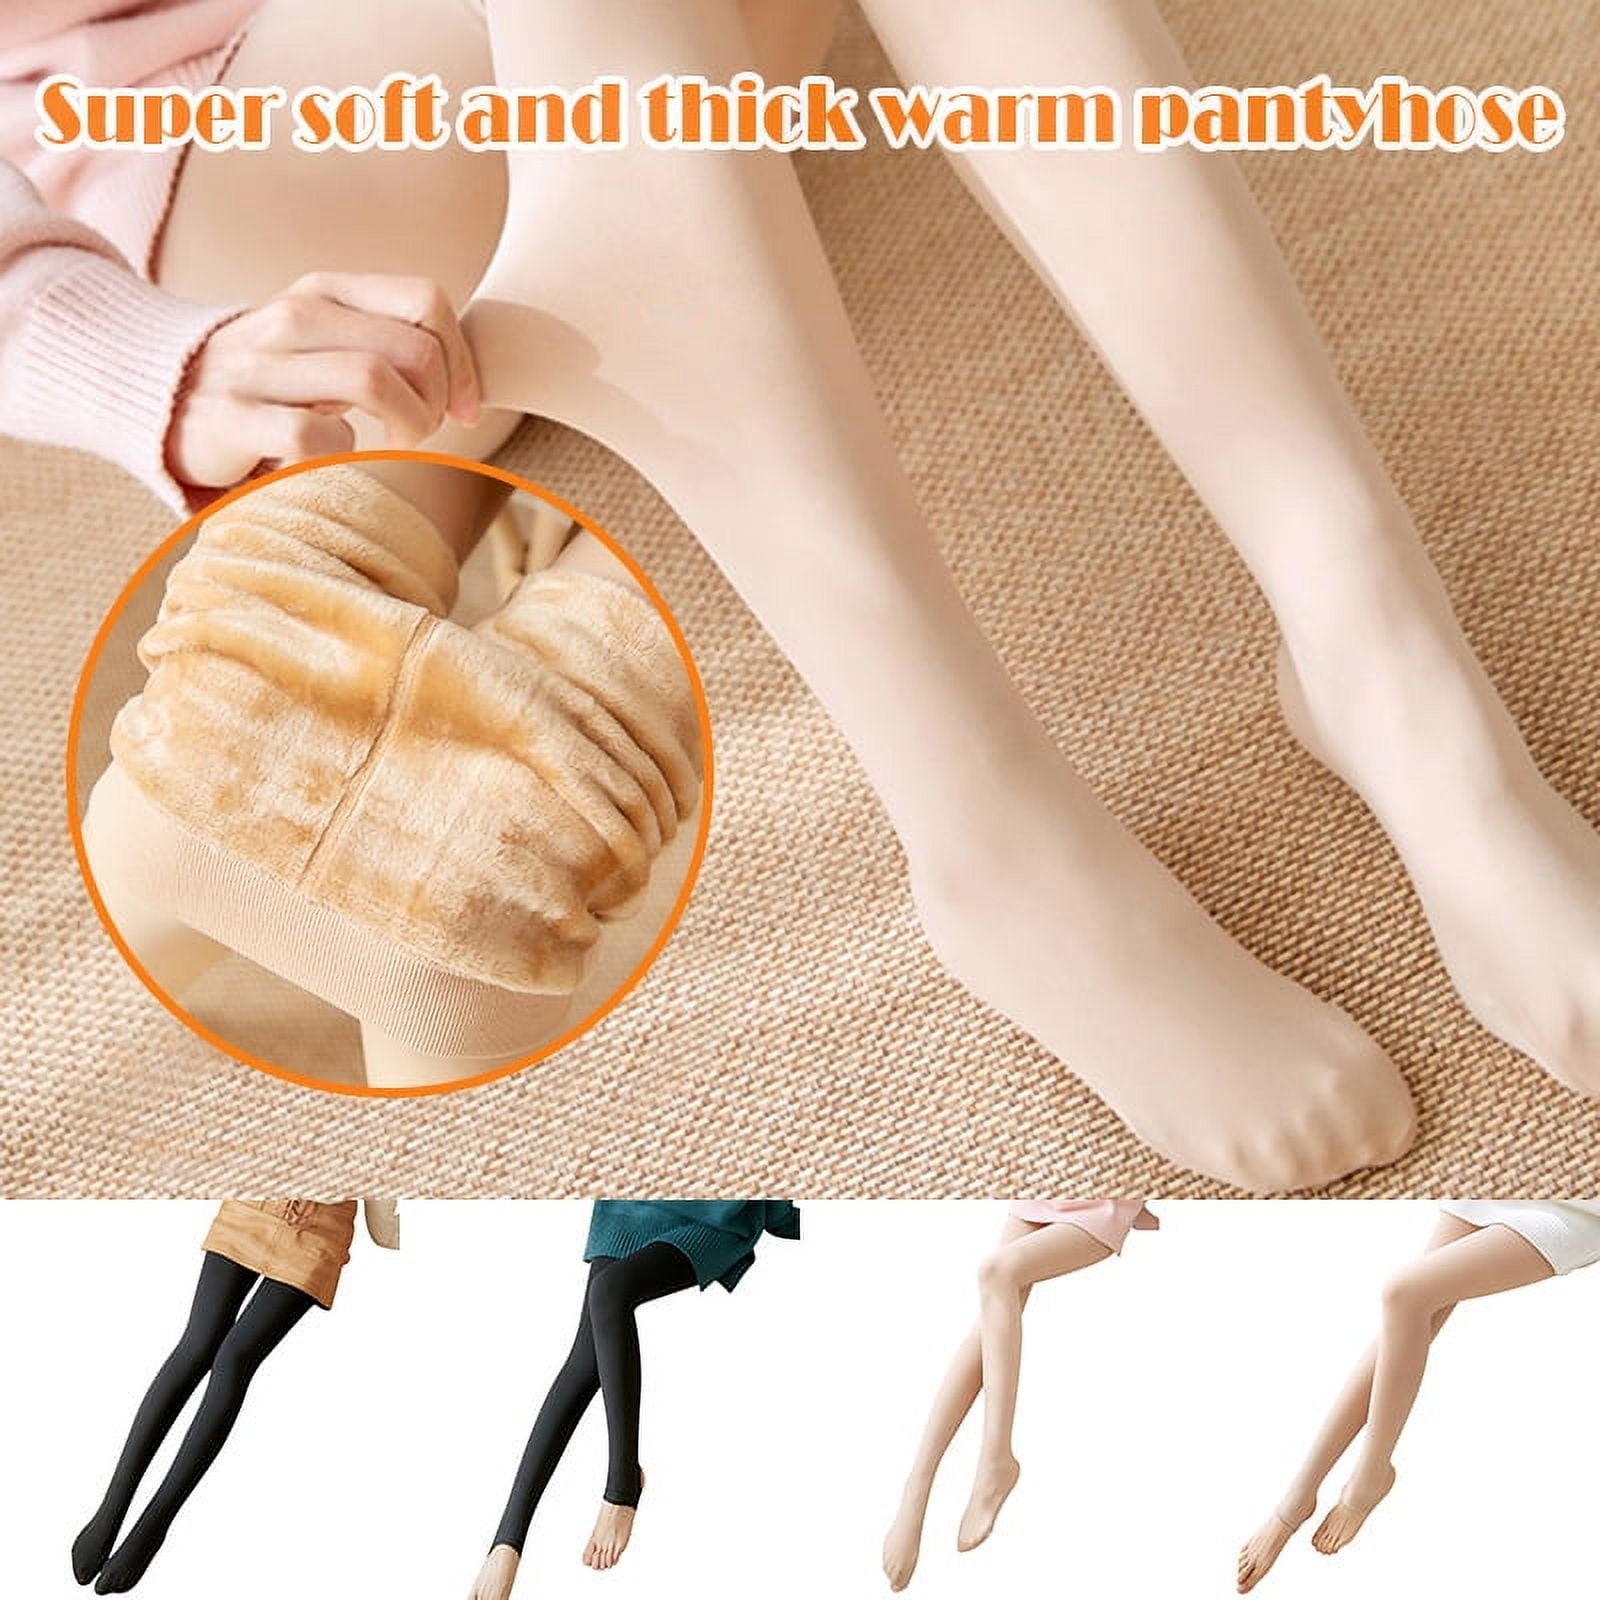 Women's Fleece Opaque Tights Stockings Warm Winter Footed Pantyhose  Leggings 500g (padded And Thickened)